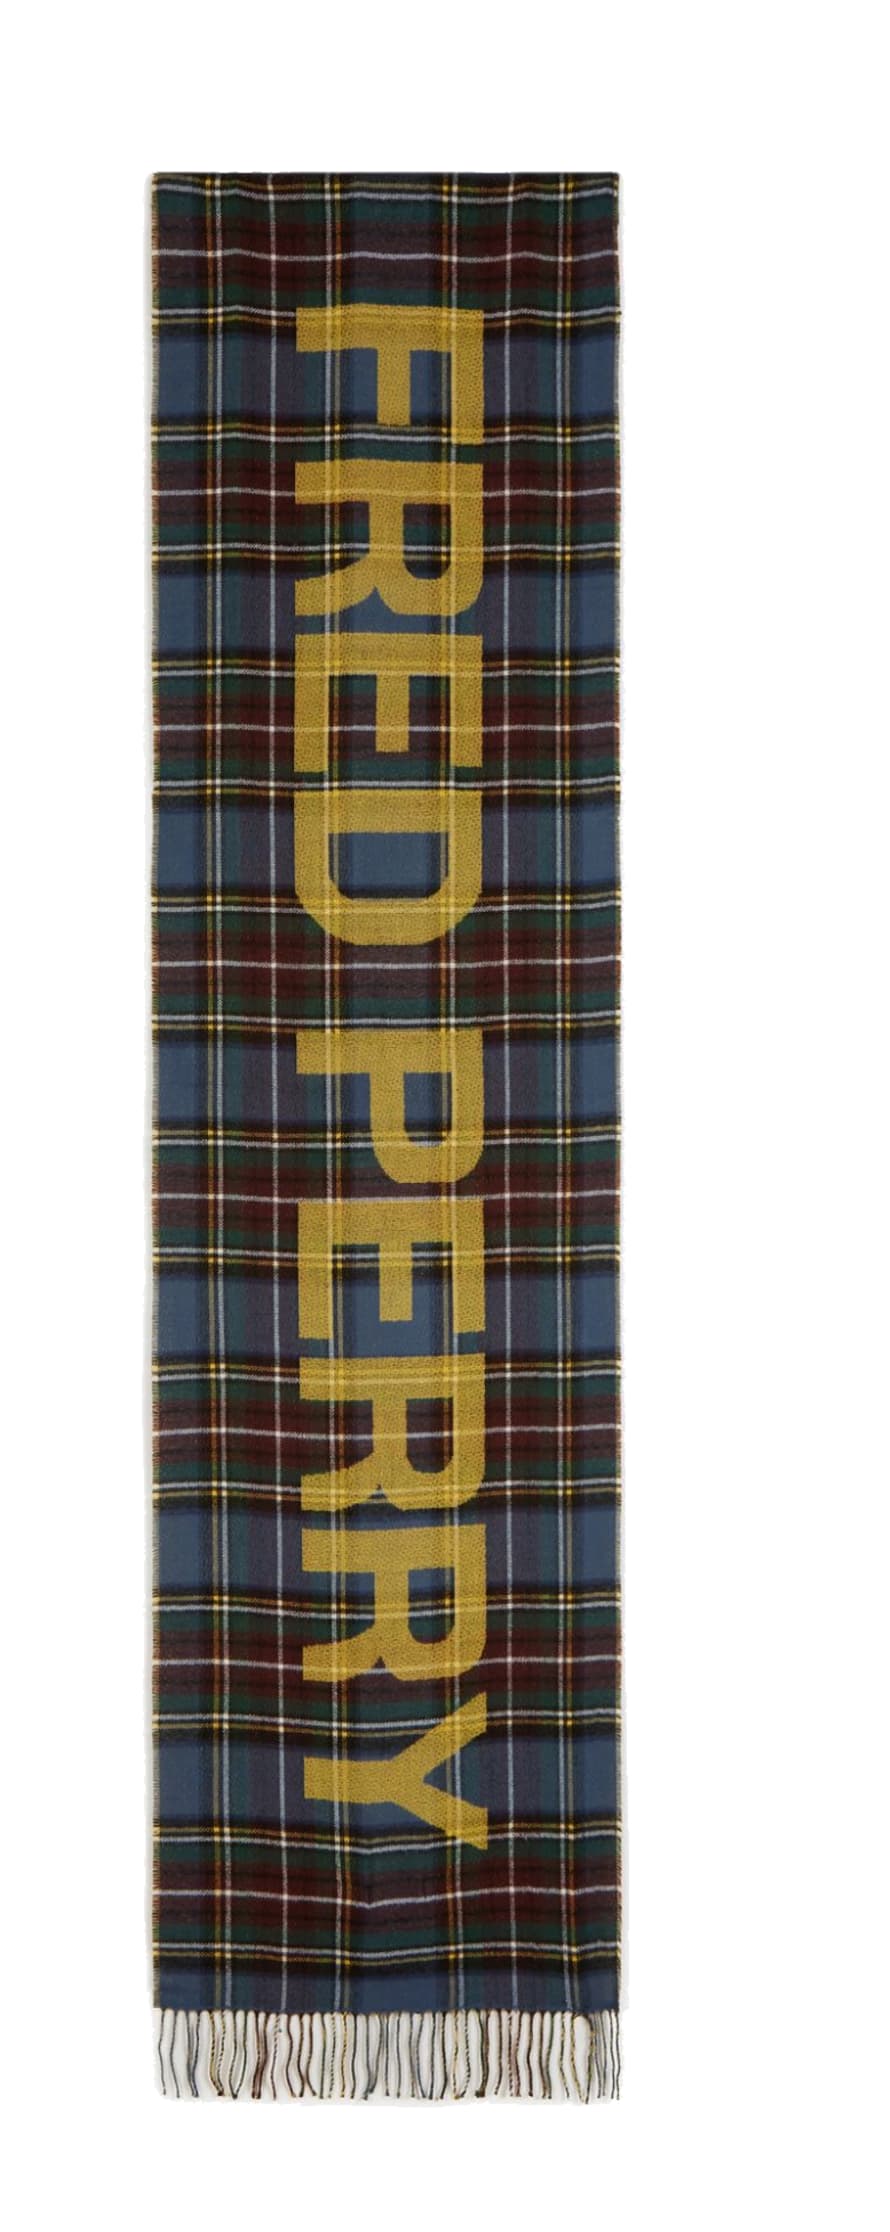 Fred Perry Authentic Graphic Oversized Scarf Tartan Silver Blue & Chrome Yellow